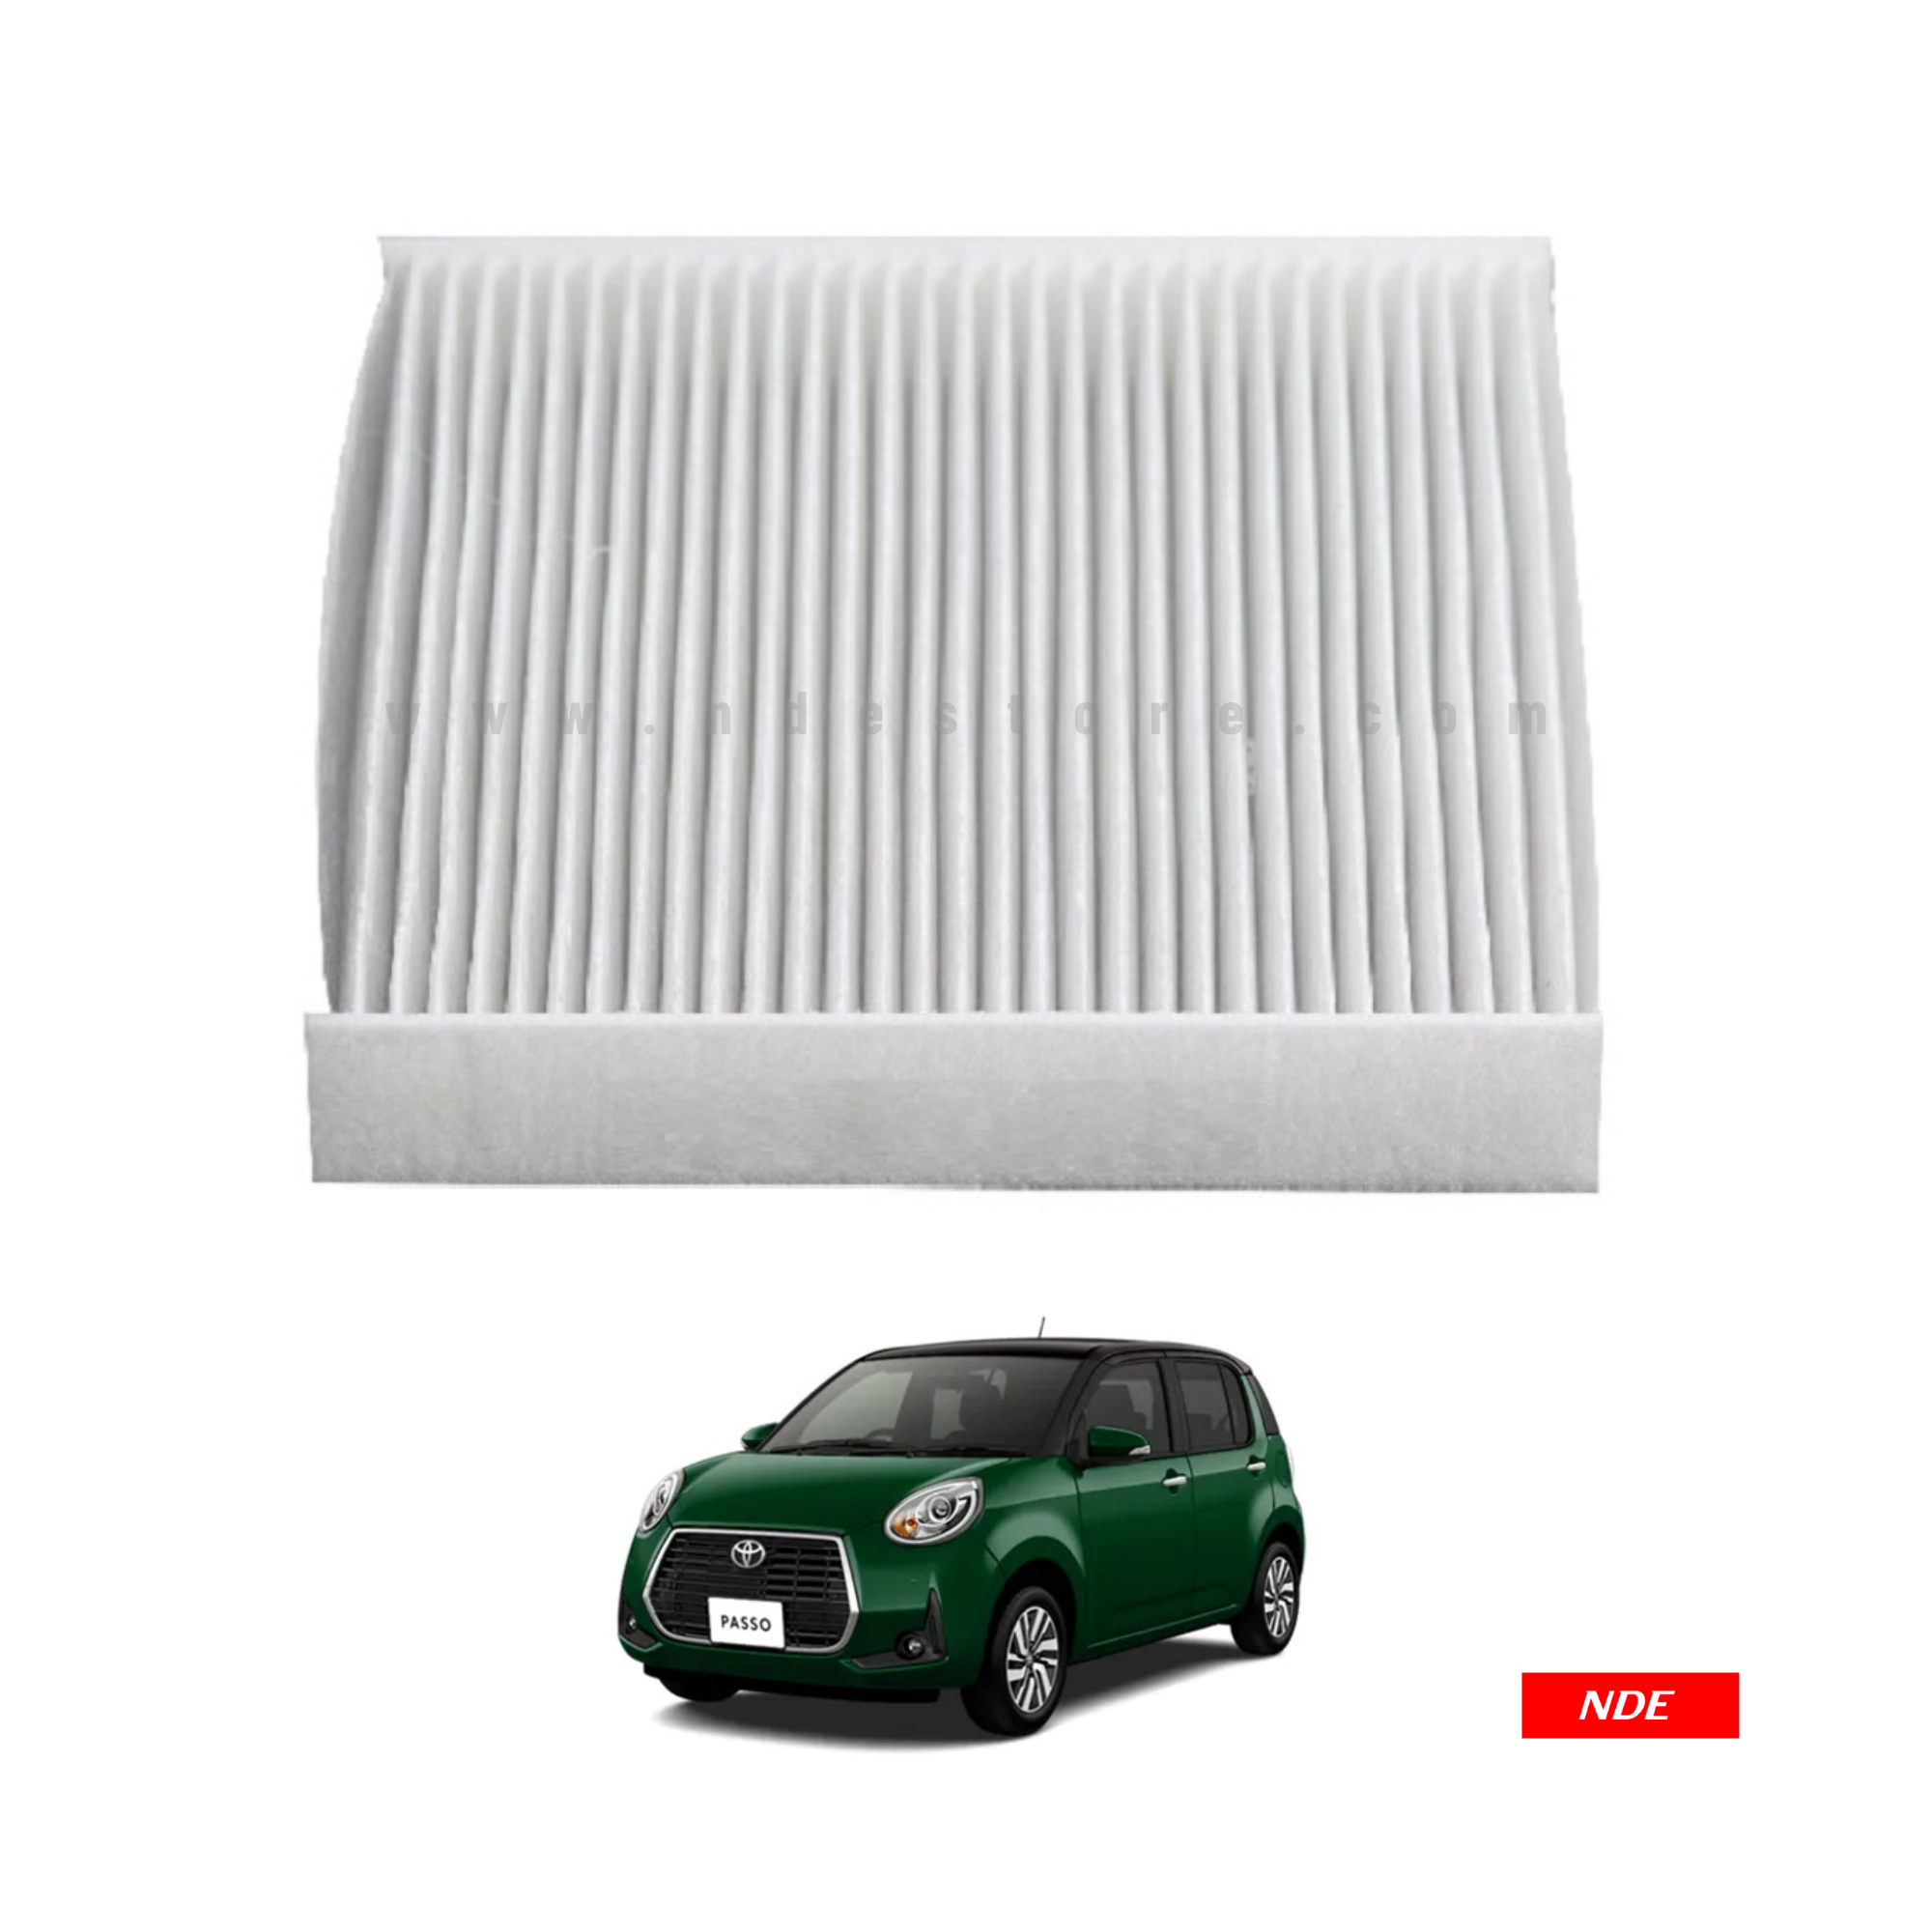 CABIN AIR FILTER / AC FILTER FOR TOYOTA PASSO (IMPORTED)